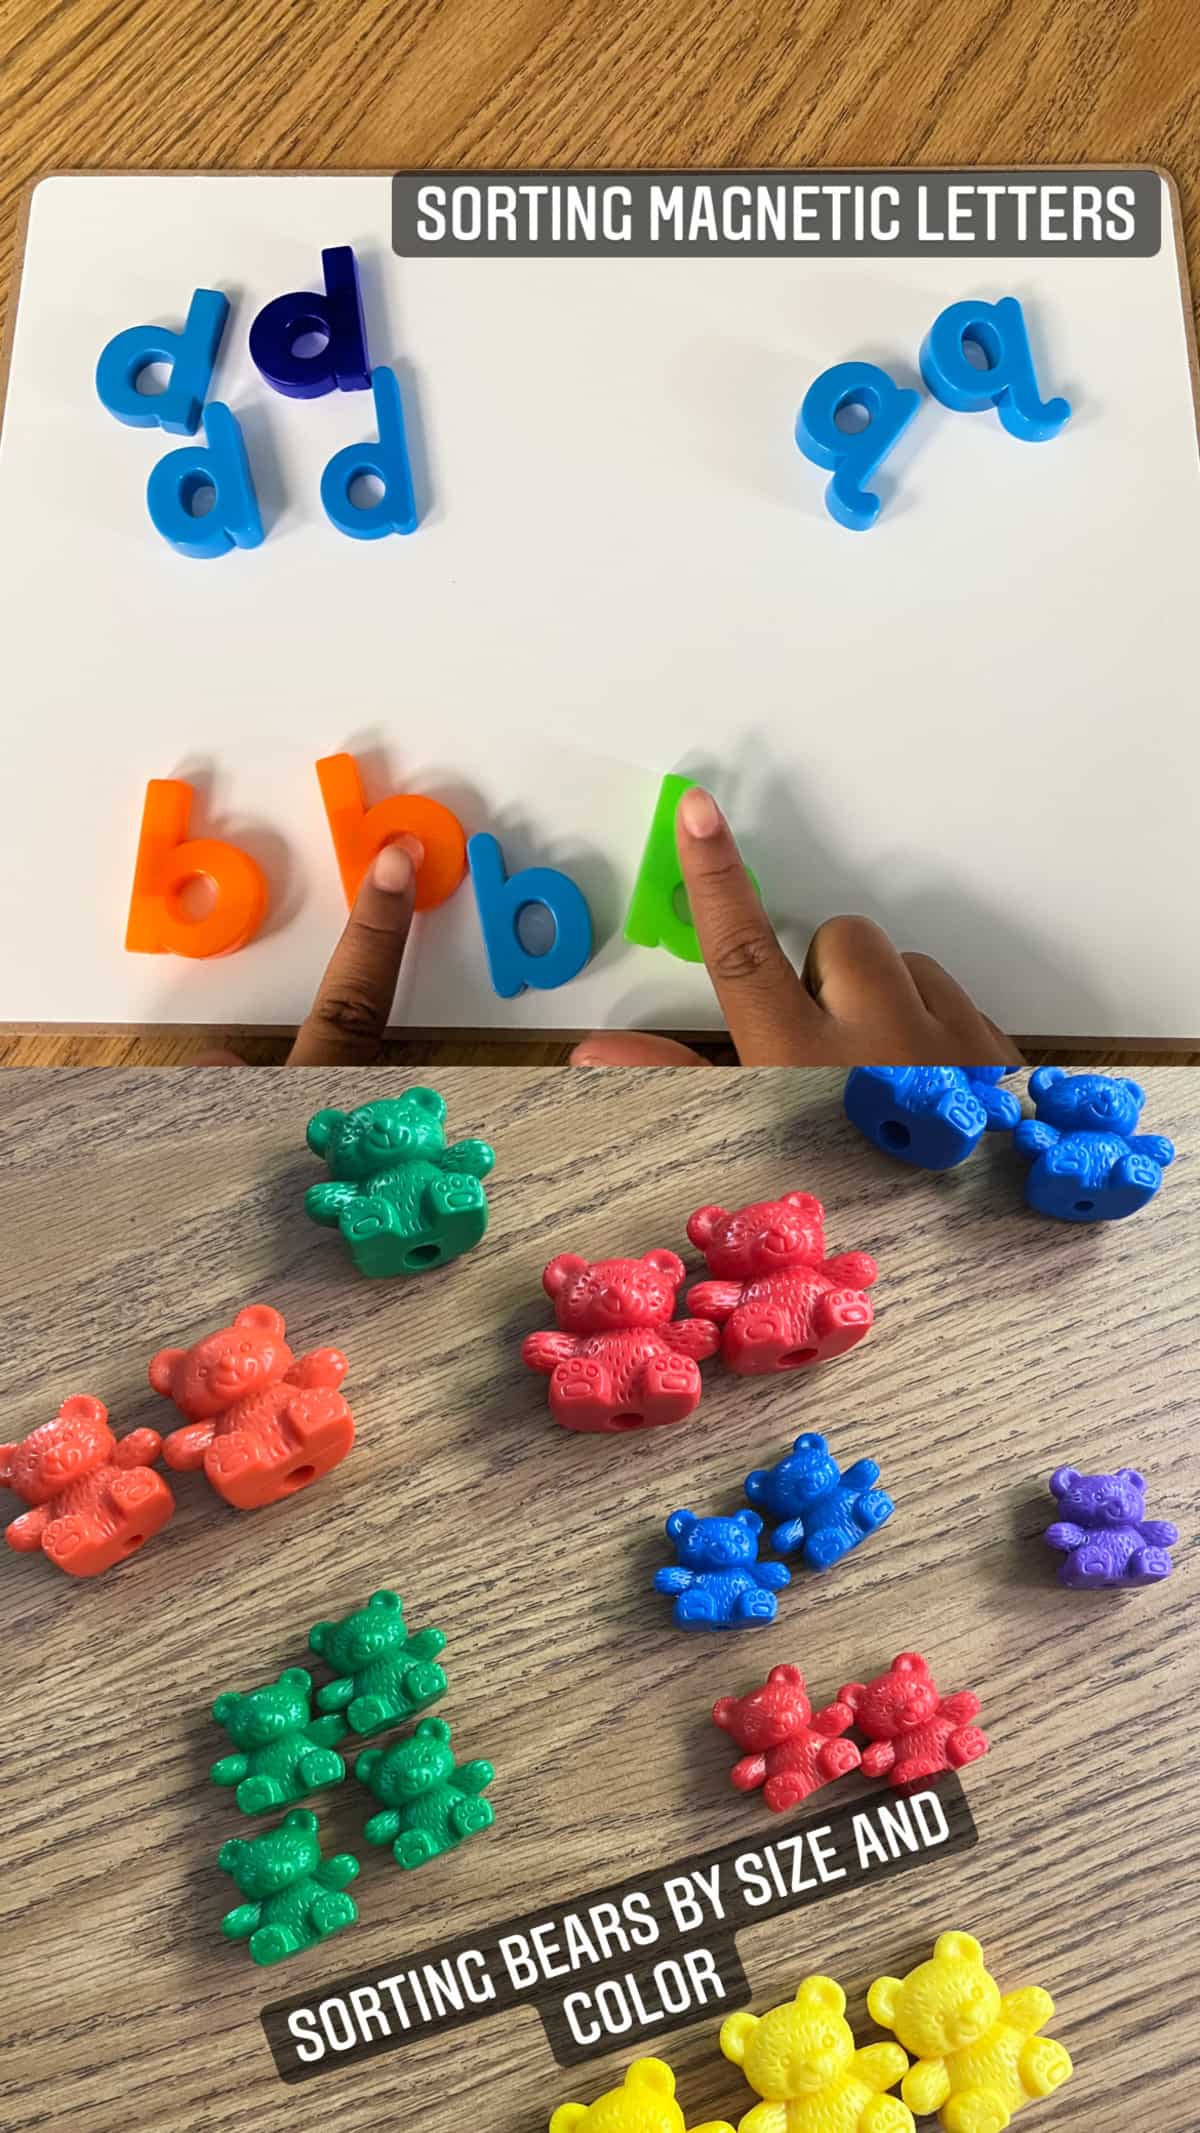 Collage of images showing magnetic letters and colored bears sorted into categories.